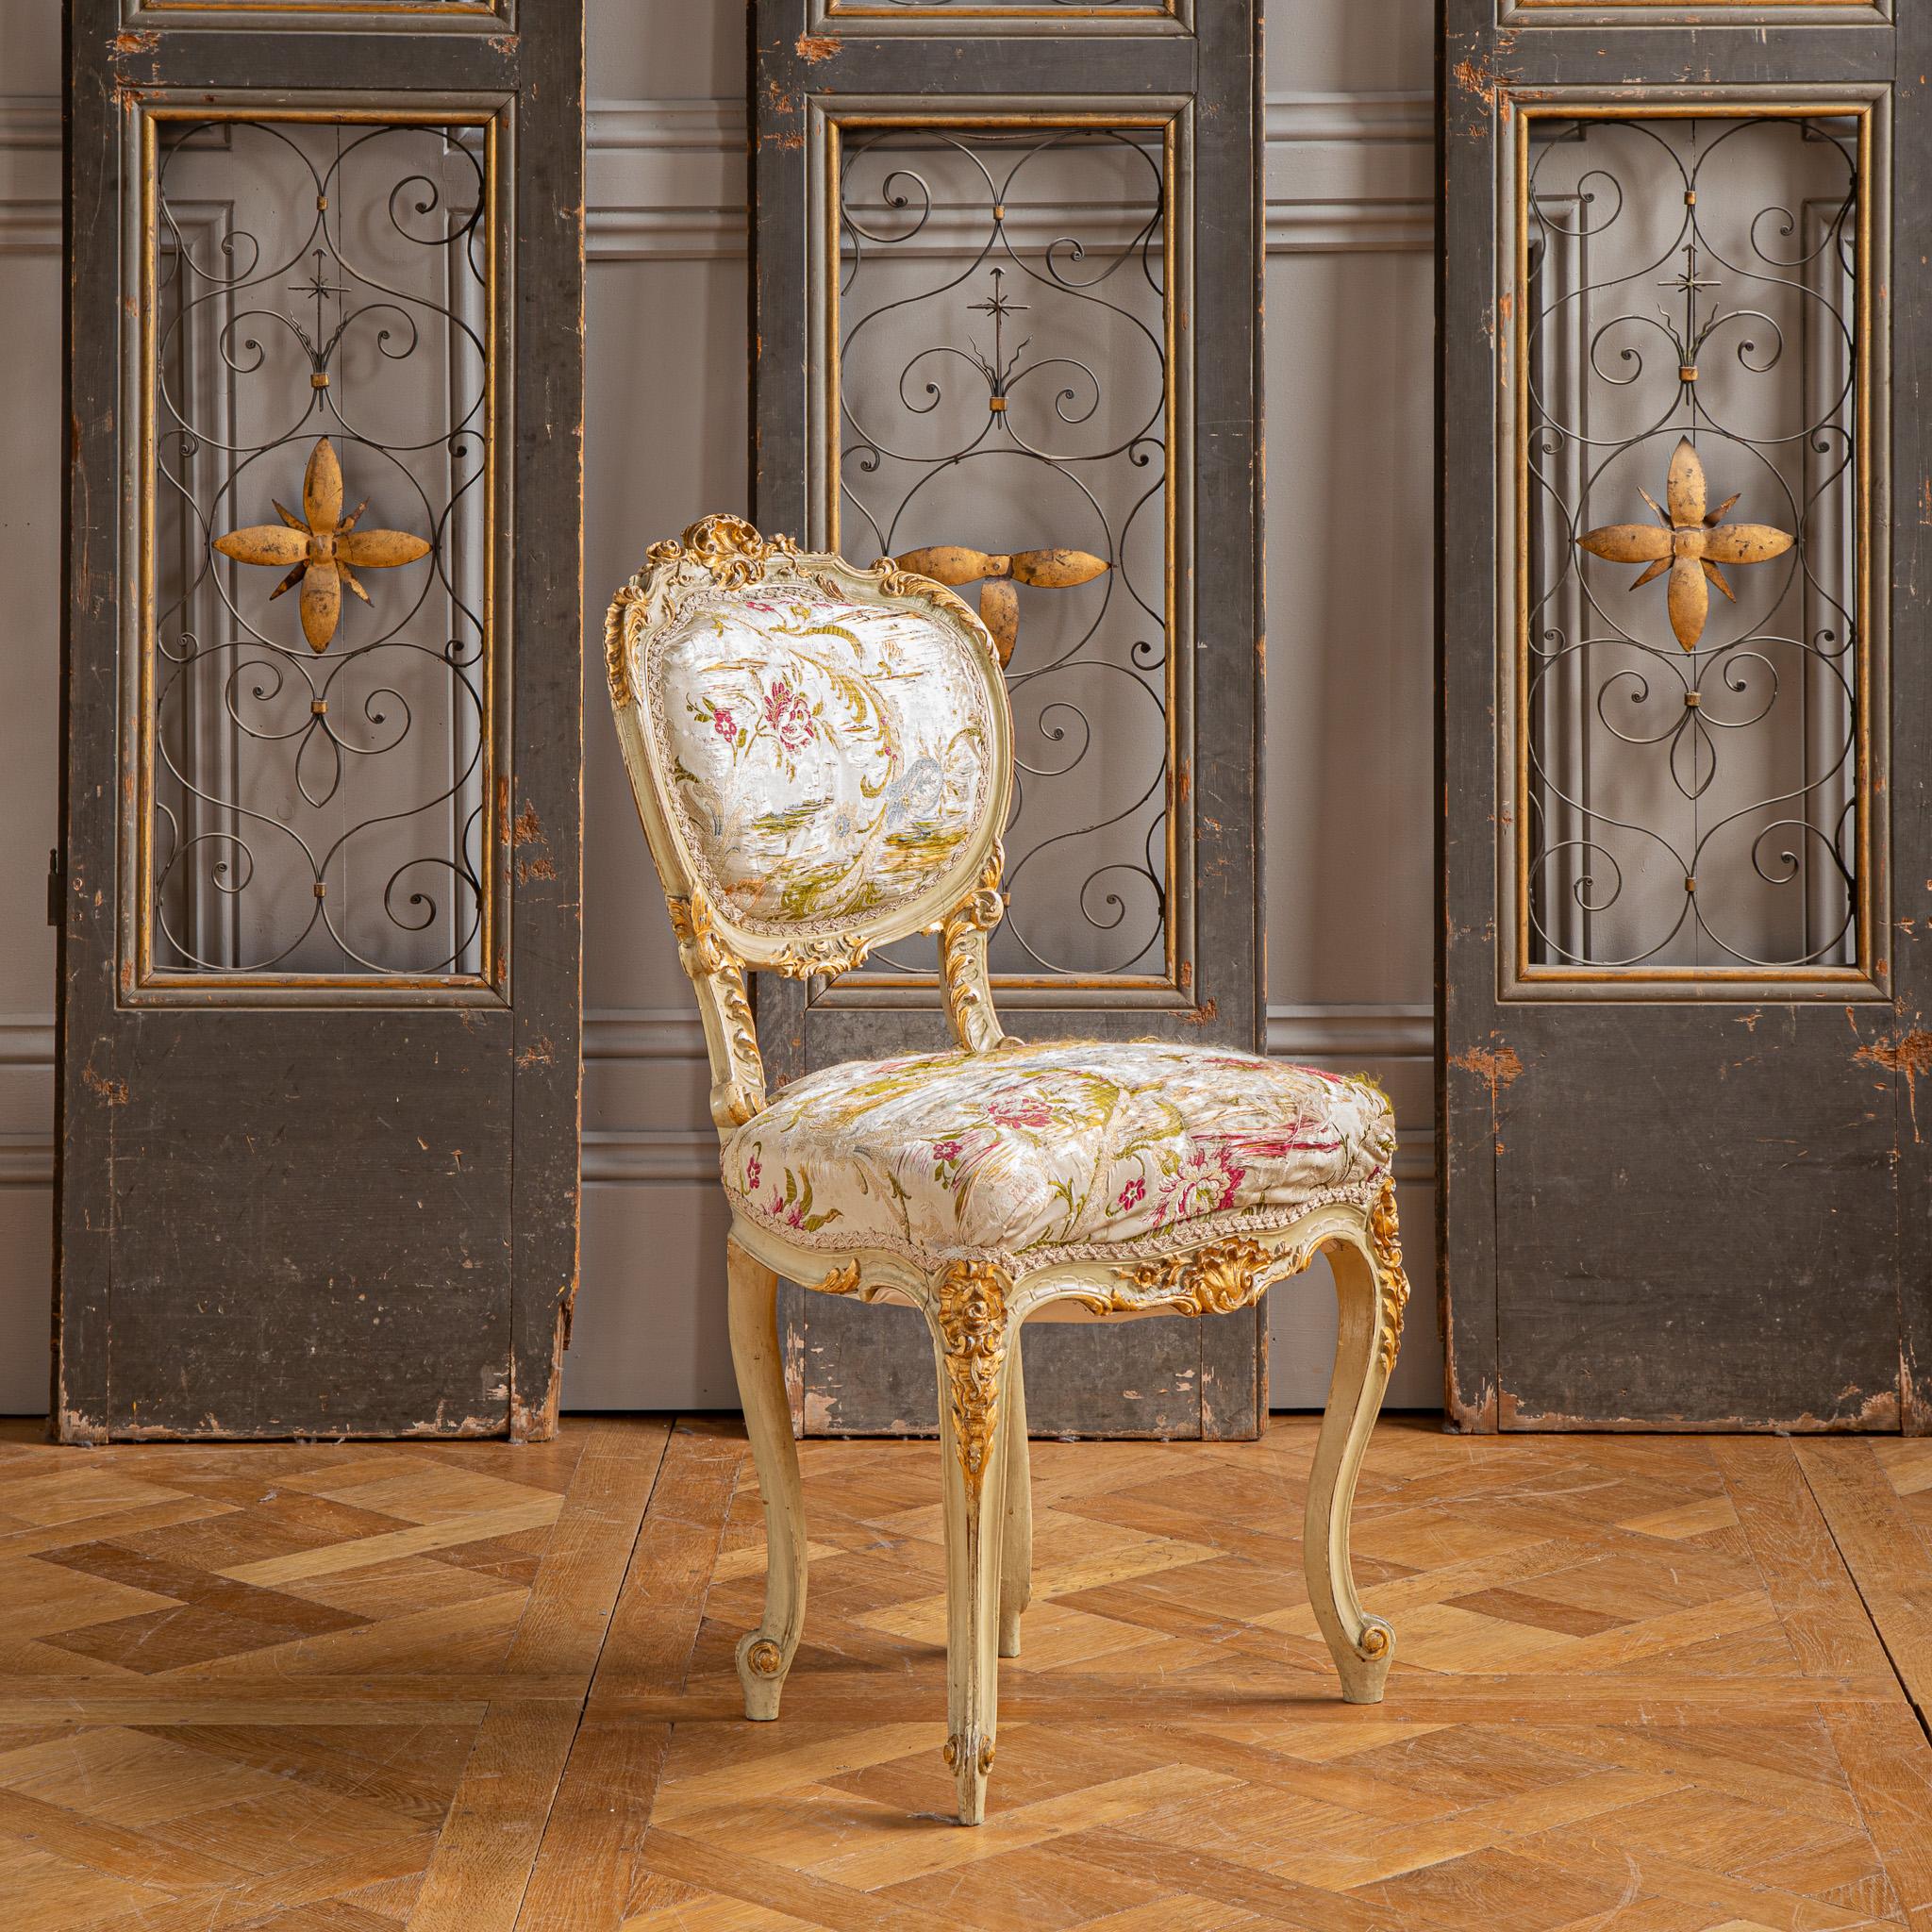 19th Century Italian Carved Gilt-wood Salon Suite - Sofa, Chairs & Footstools  For Sale 1